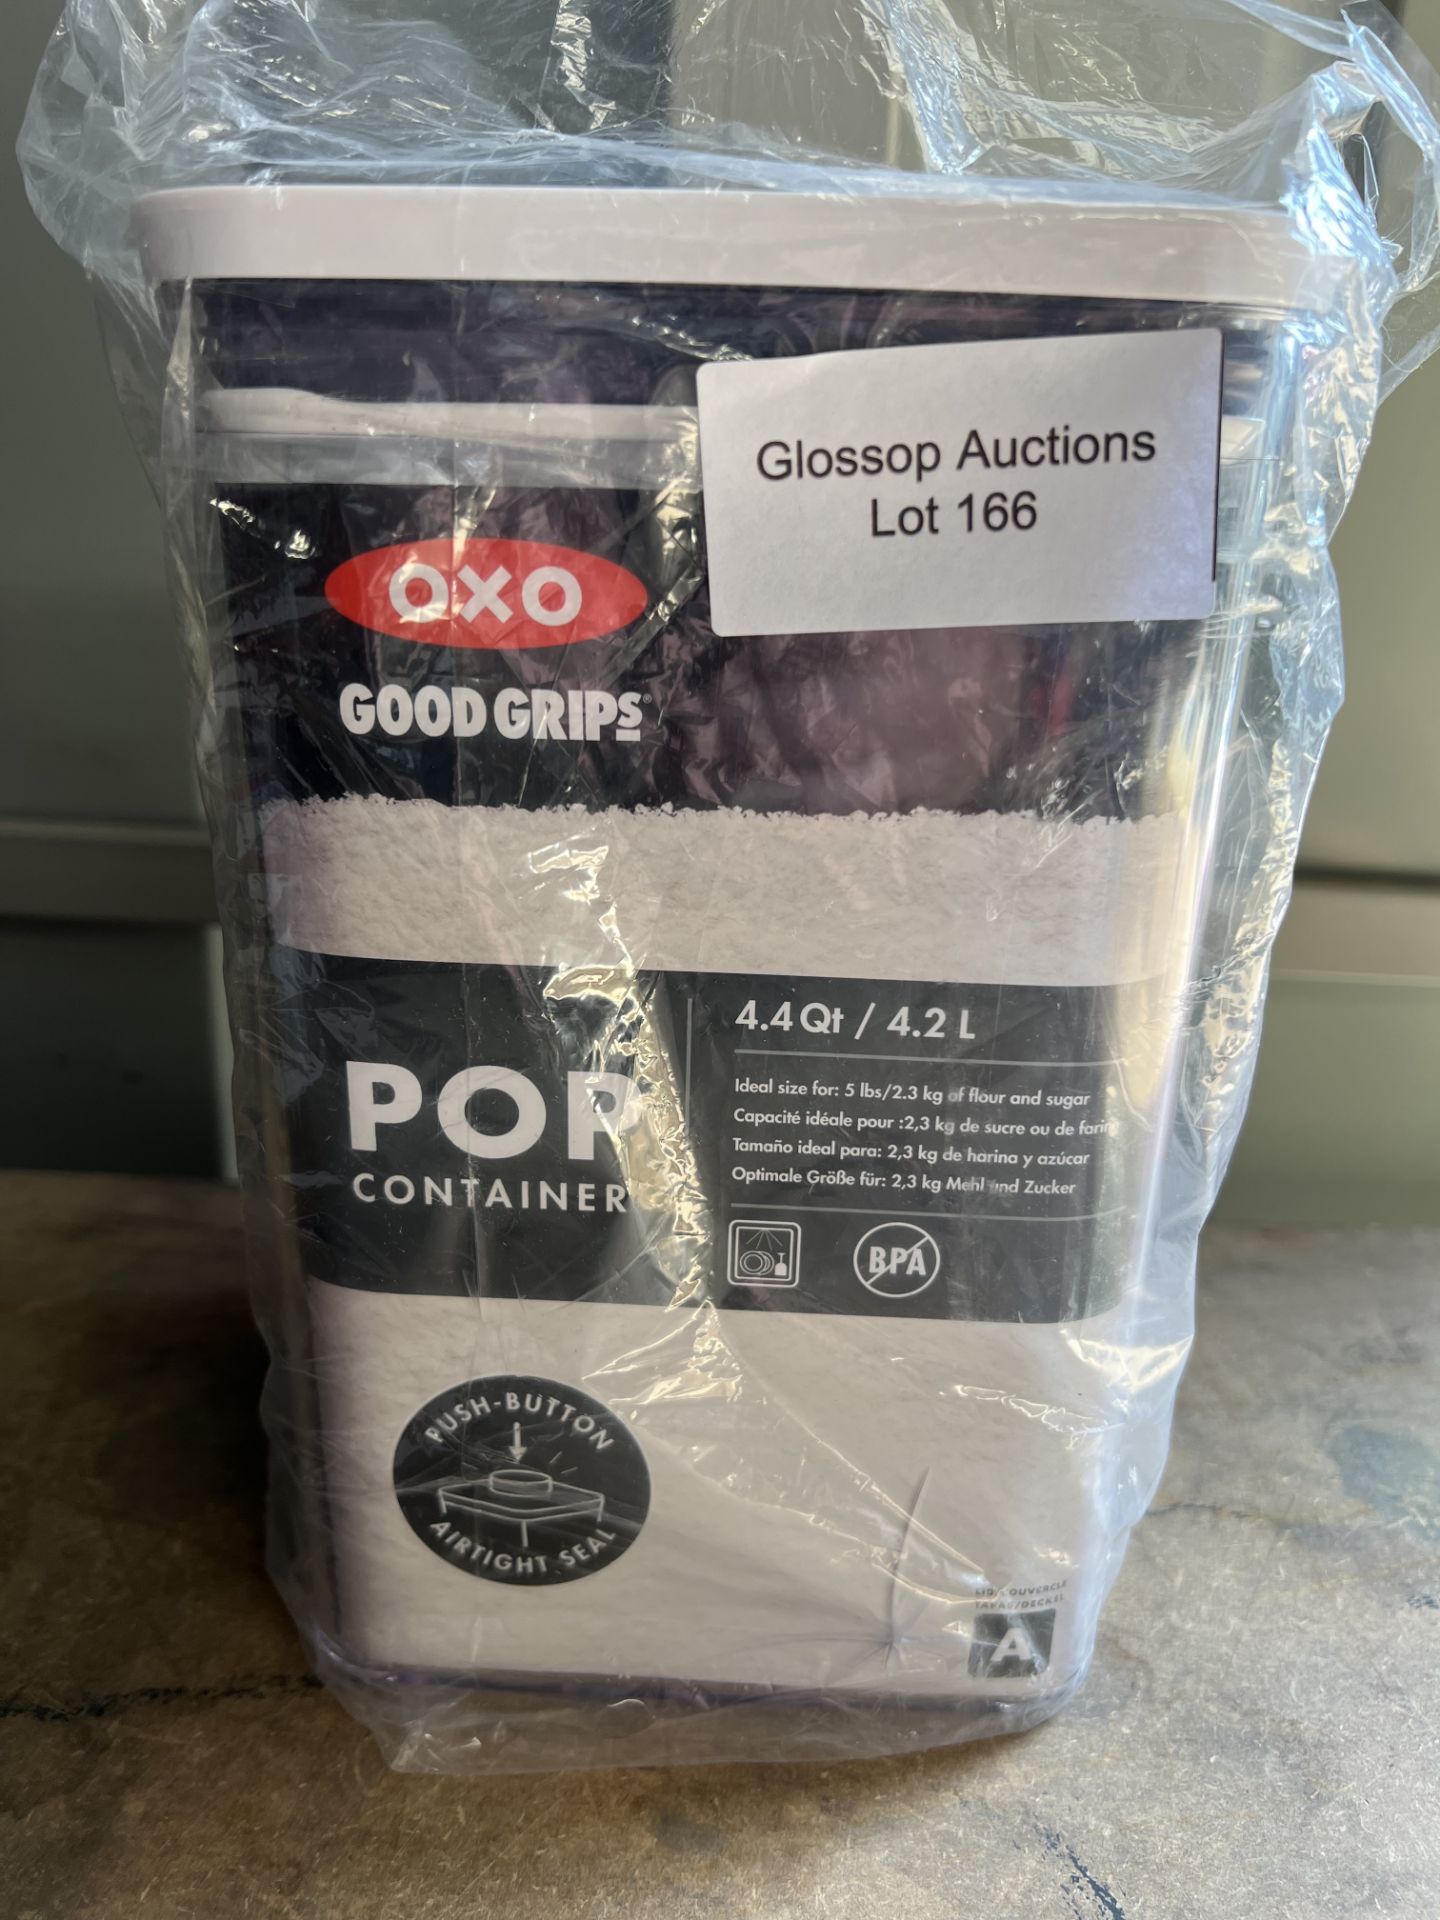 Oxo Good Grips Pop 2.0 Container – 4.2L For Flour & More. RRP £20 - GRADE U - Image 2 of 2